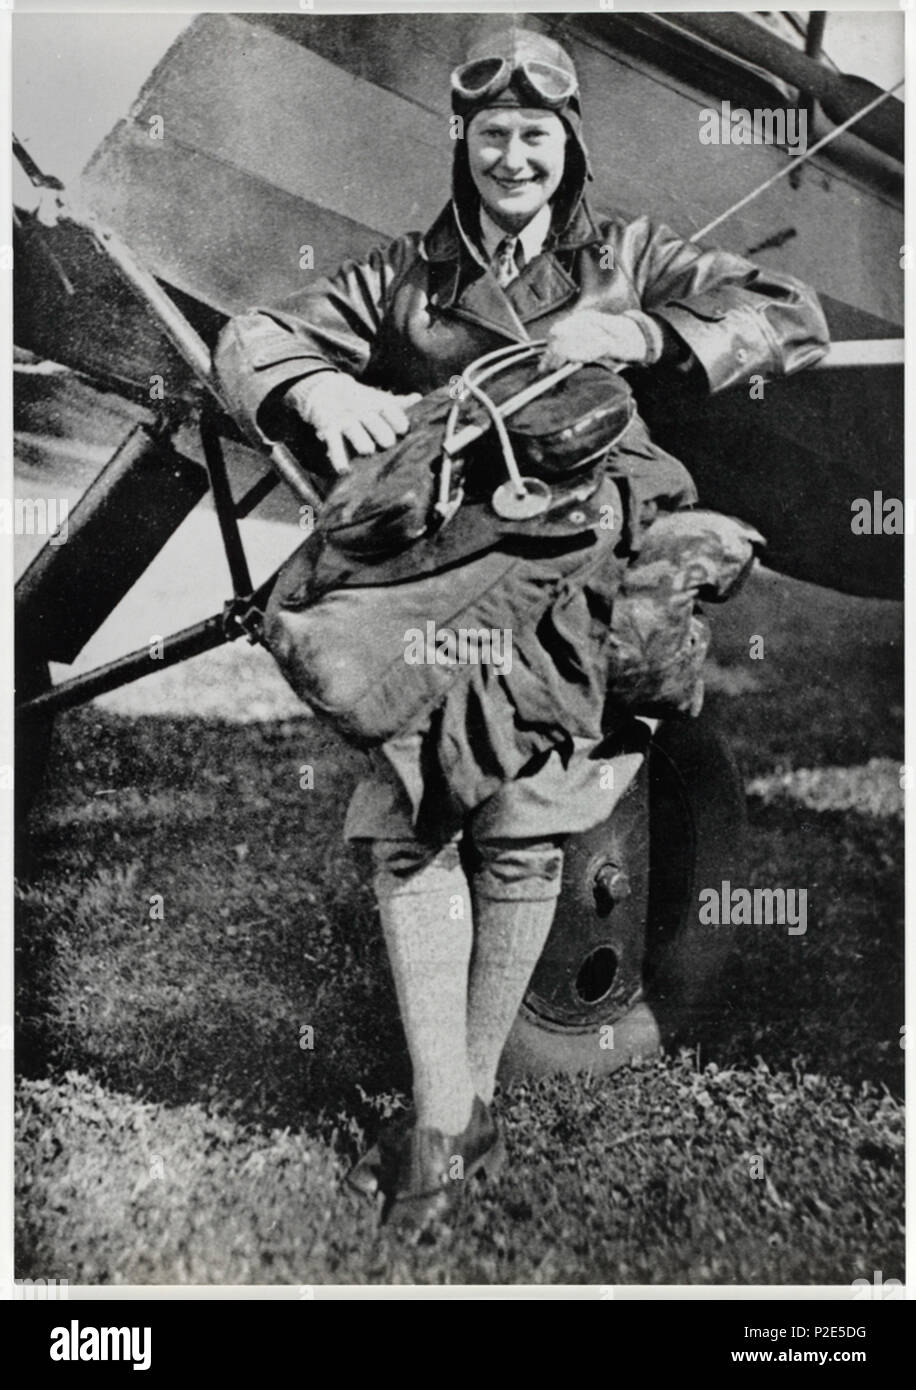 . Format: Photograph Notes: Nancy Bird Walton was born in Sydney in 1915. In 1933, at the age of 17, she became the youngest Australian woman to gain a pilot's licence. One year later she obtained her commercial licence. In 1937-38 she operated a charter service in Queensland followed by a 2 year world tour studying civil aviation. In 1950 she founded the Australian Women's Pilots' Association. She won the Ladies Trophy South Australian Centenary Air Race from Brisbane to Adelaide in 1936 and came 5th in the All Women's Transcontinental Air Race, America in 1958. She was appointed AO in 1990.  Stock Photo